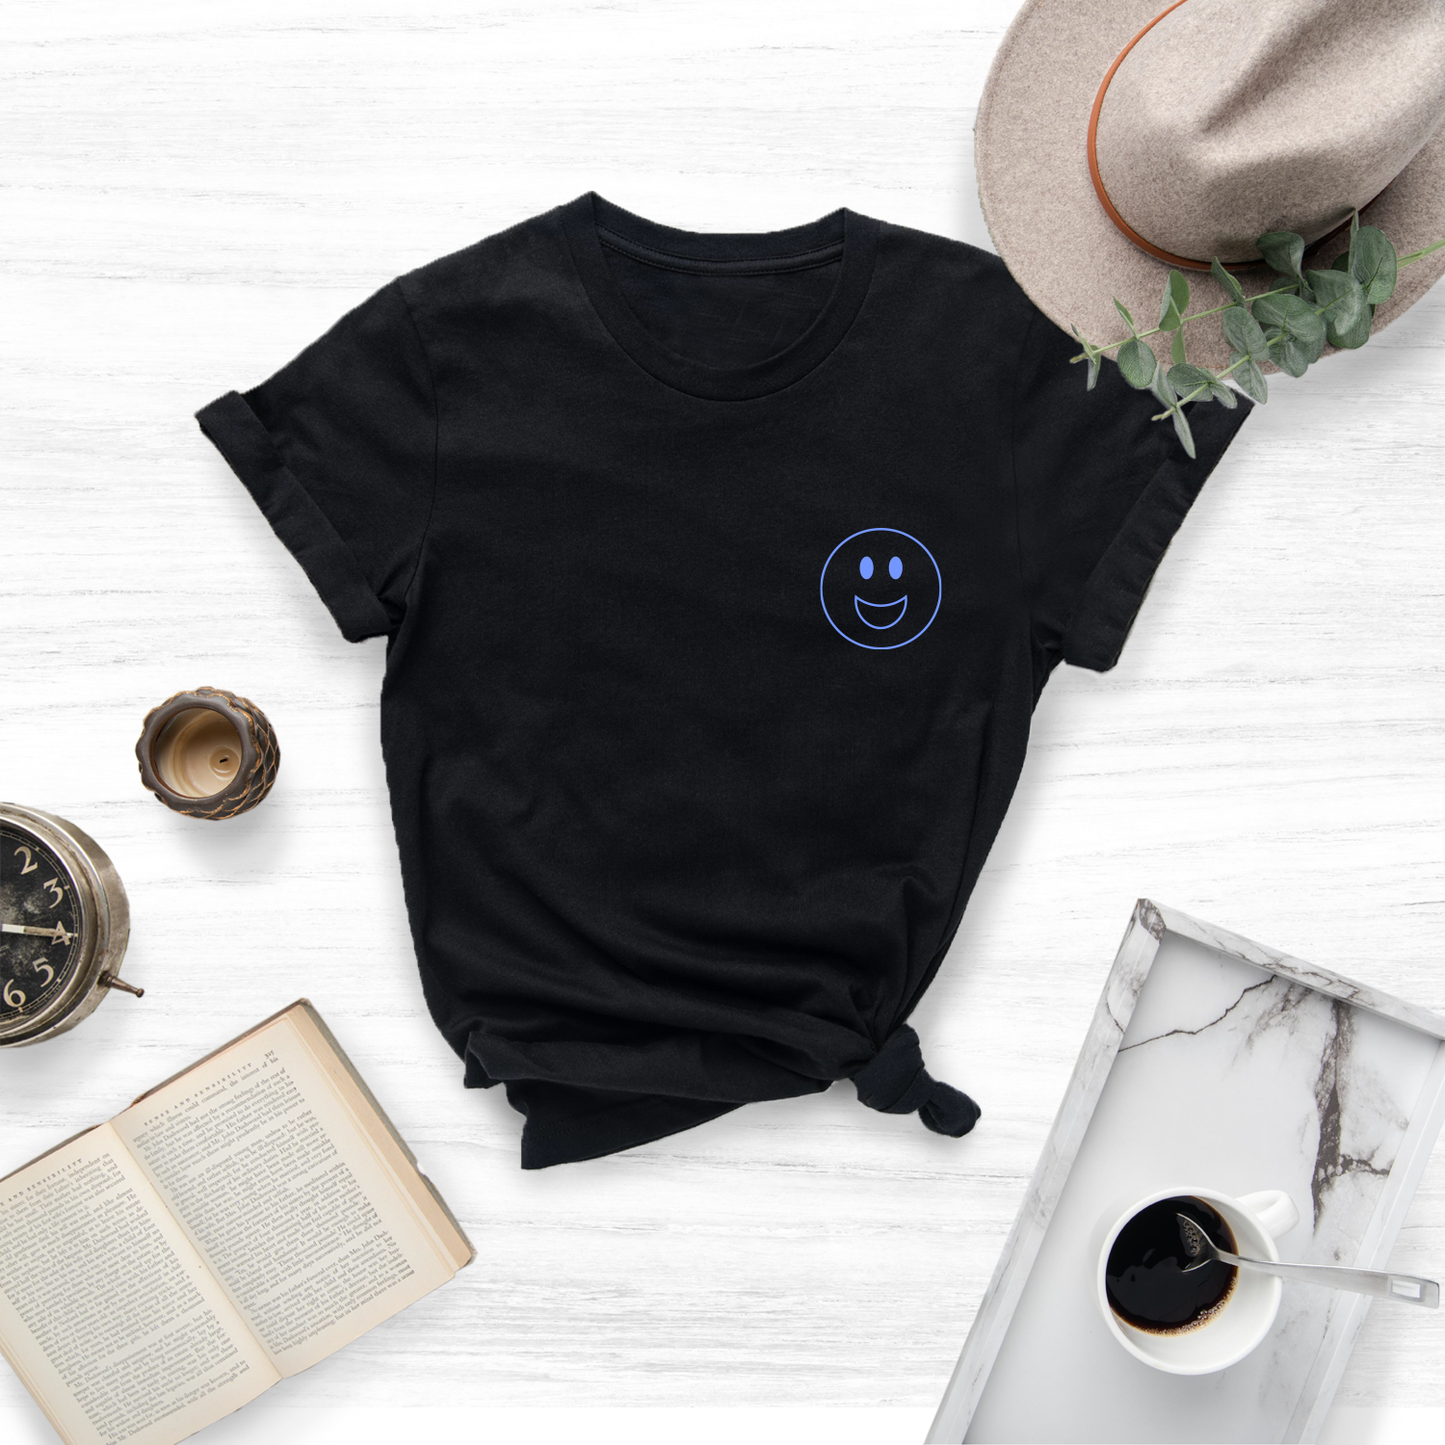 Embrace a happy state of mind with this unique and eye-catching "Happy Face" t-shirt.